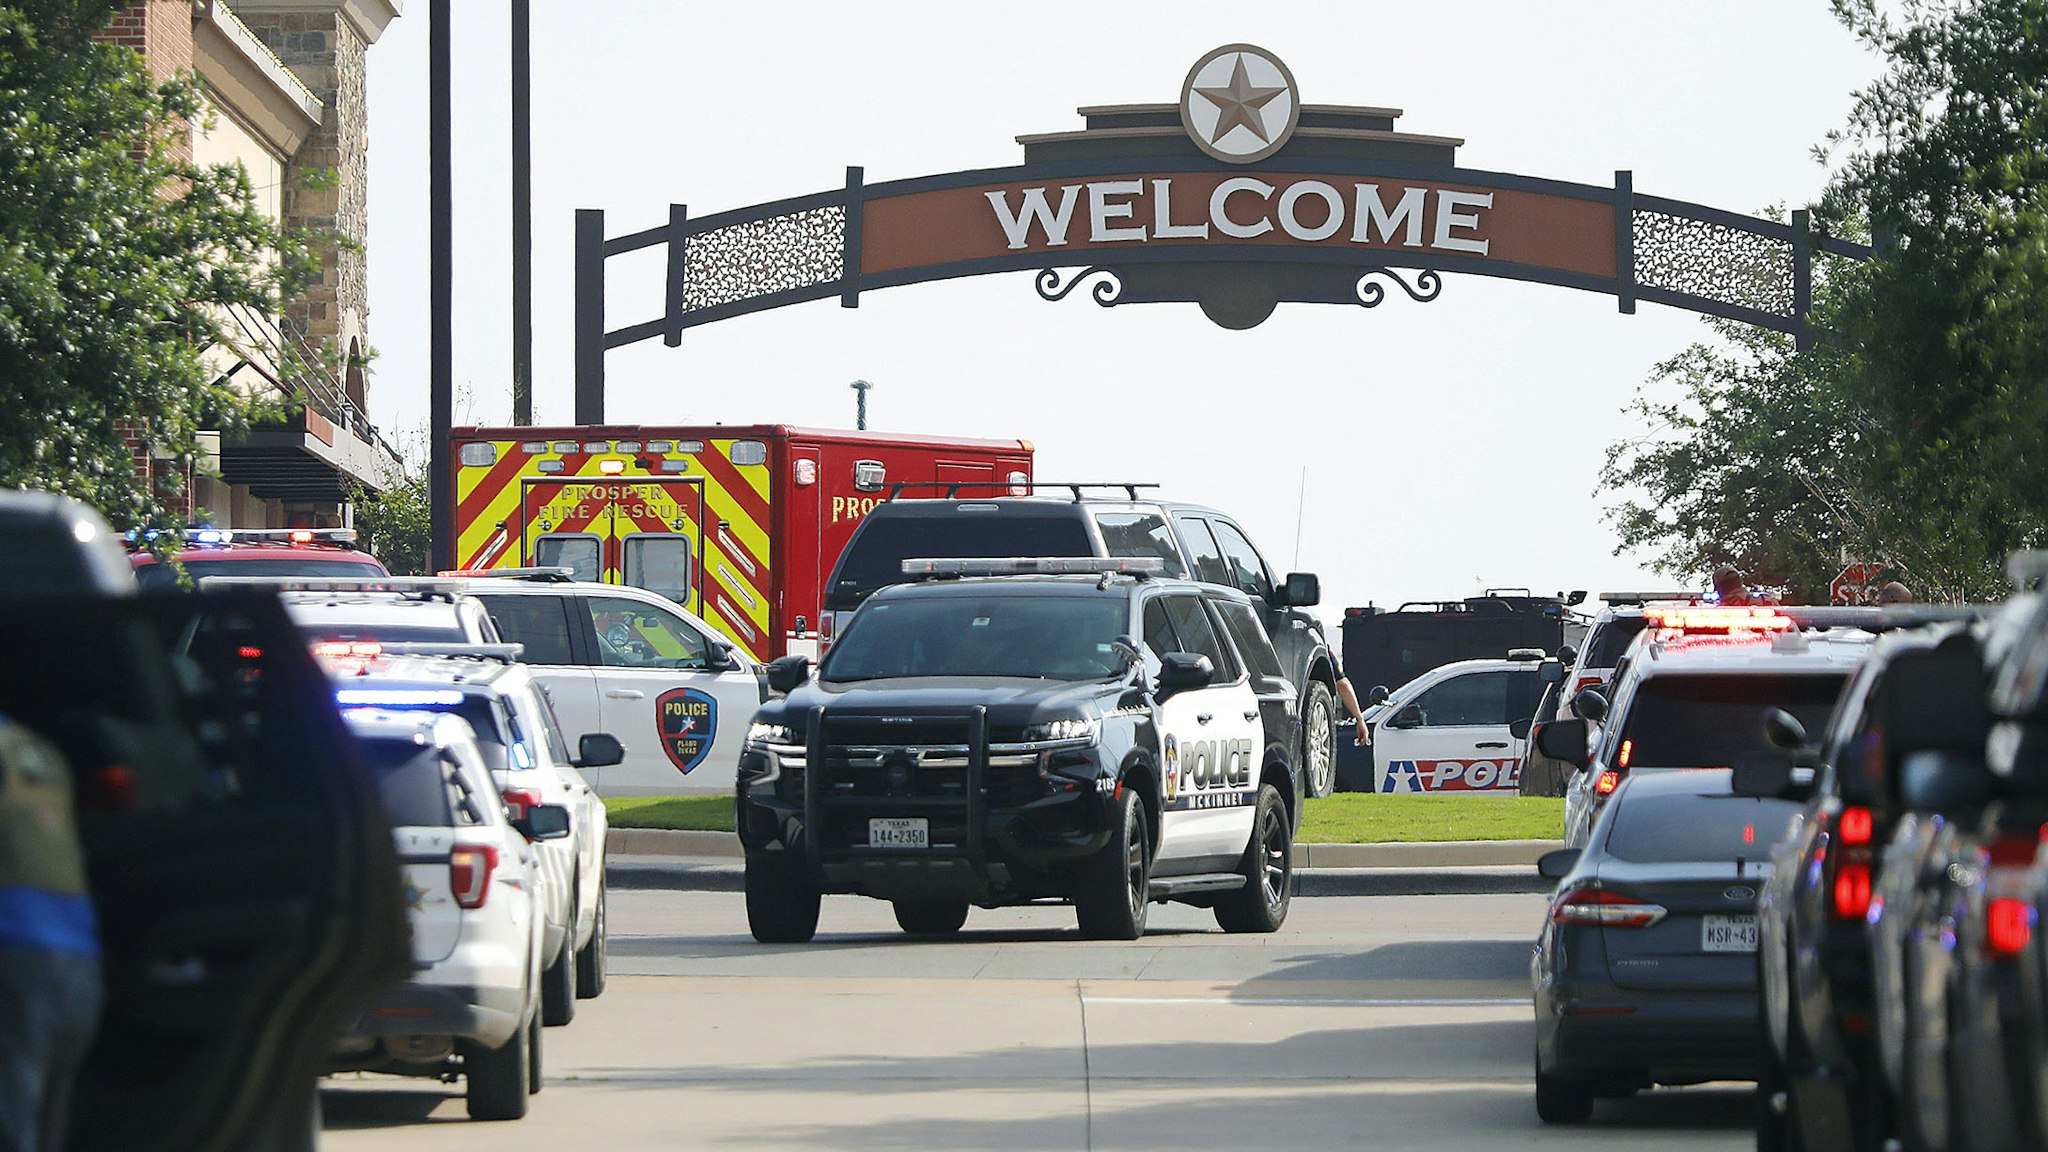 ALLEN, TEXAS - MAY 6: Emergency vehicles line the entrance to the Allen Premium Outlets where a shooting took place on May 6, 2023 in Allen, Texas. According to reports, a shooter opened fire at the outlet mall, injuring at least nine people who were taken to local hospitals. The police have confirmed there were fatalities but have not specified how many. The unidentified shooter was neutralized by an Allen Police officer responding to an unrelated call.